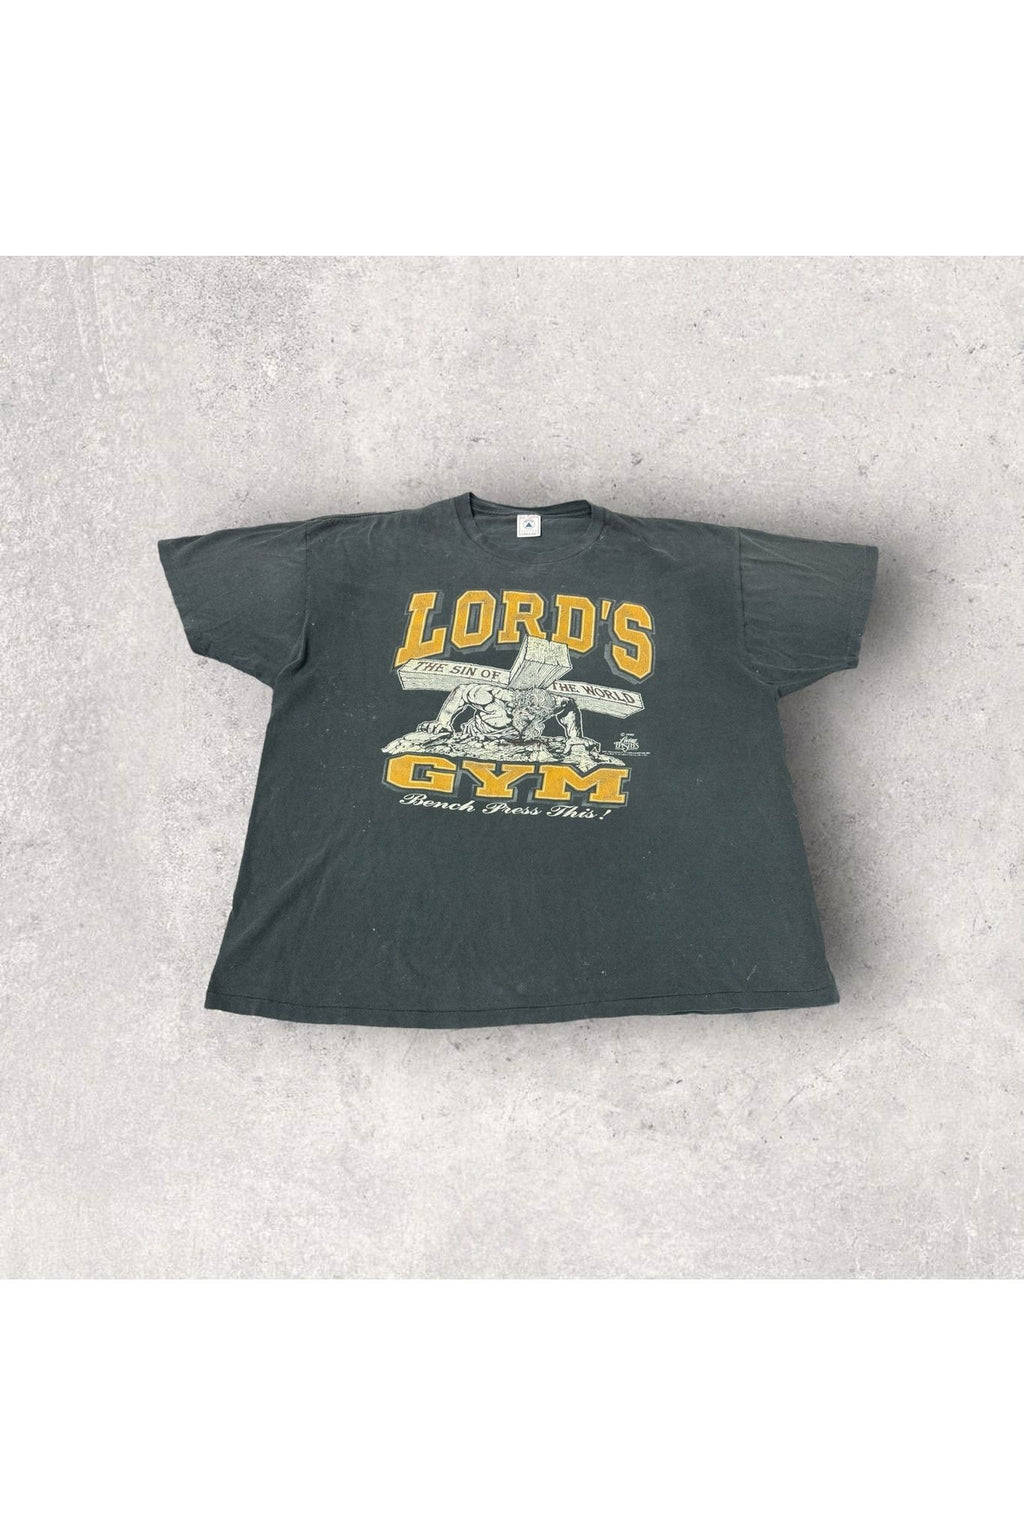 Vintage Single Stitch Delta 1990 Lord's Gym His Pain Is Your Gain Tee- XXL